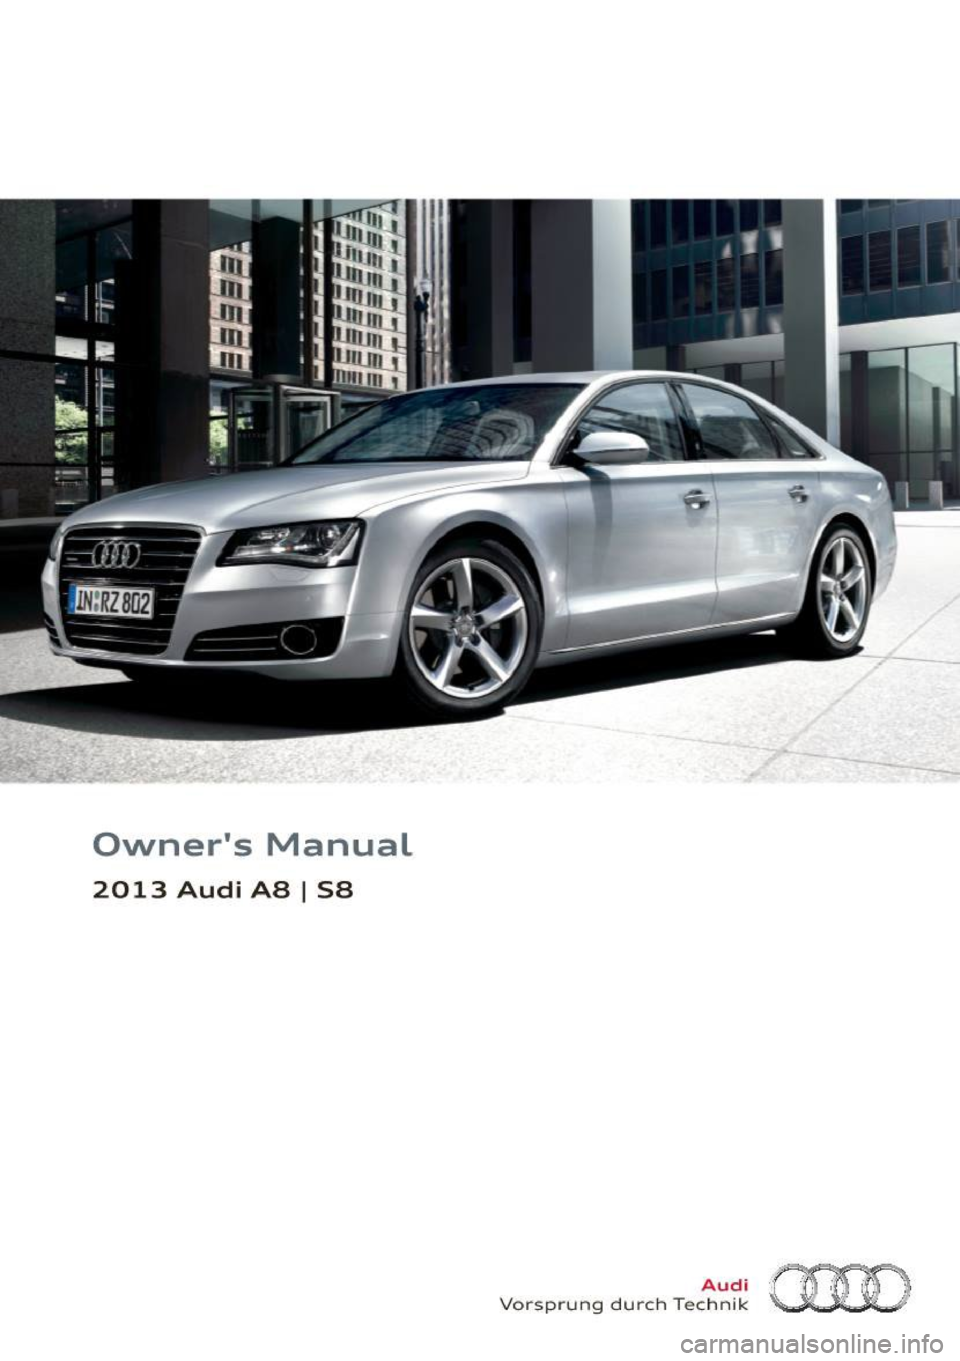 AUDI A8 2013  Owners Manual Owners  Manual 
2013  Audi  AS I S8 
Vorsp rung  du rch  Tec~~f~ am  